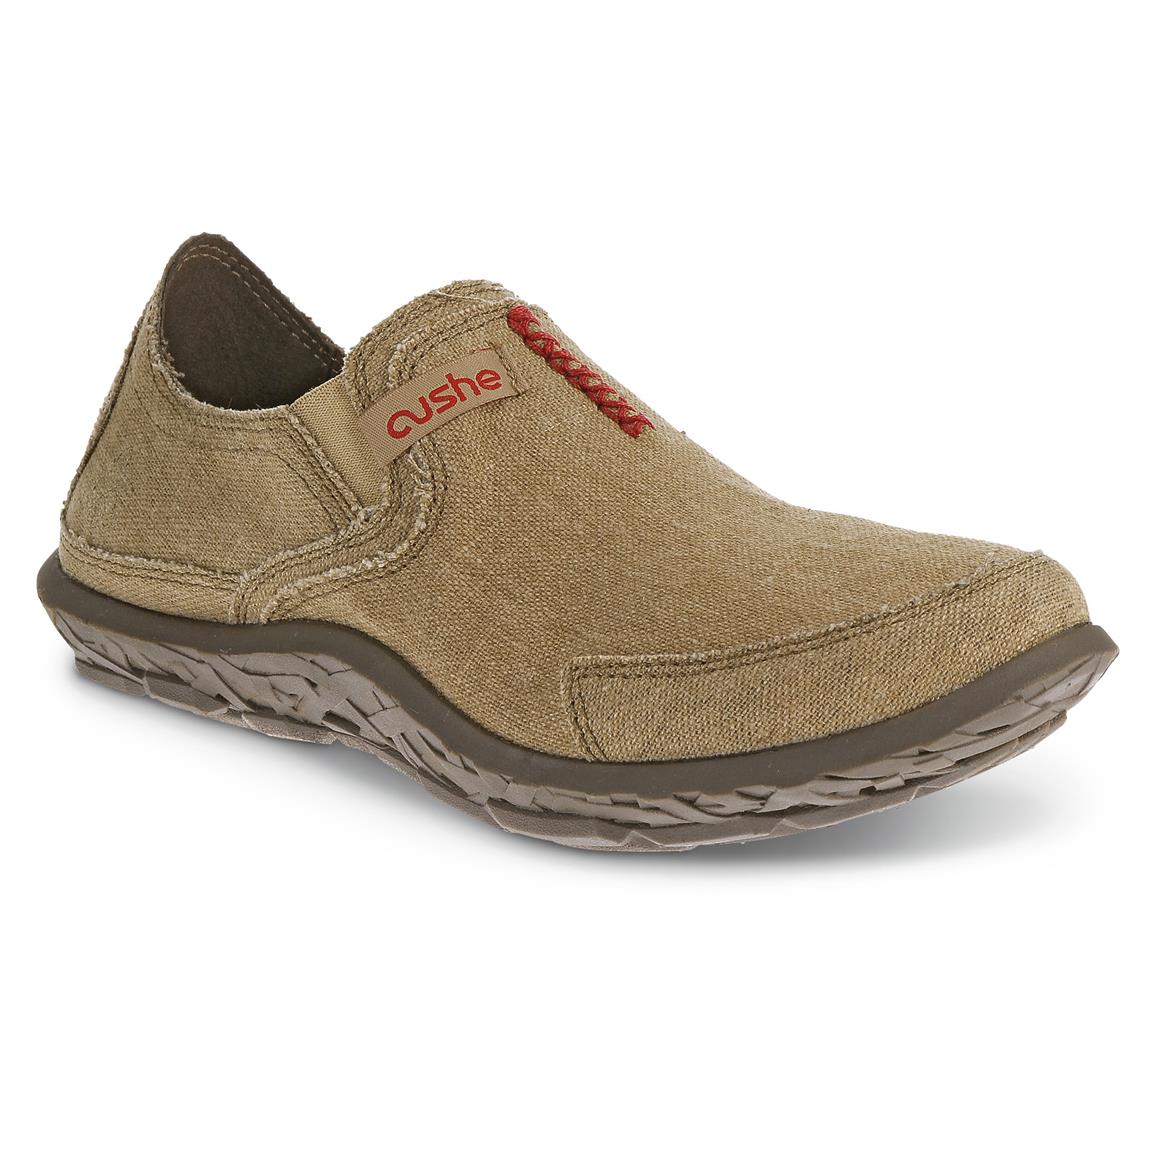 Cushe Slippers Slip-on Shoes - 653989, Casual Shoes at Sportsman's Guide